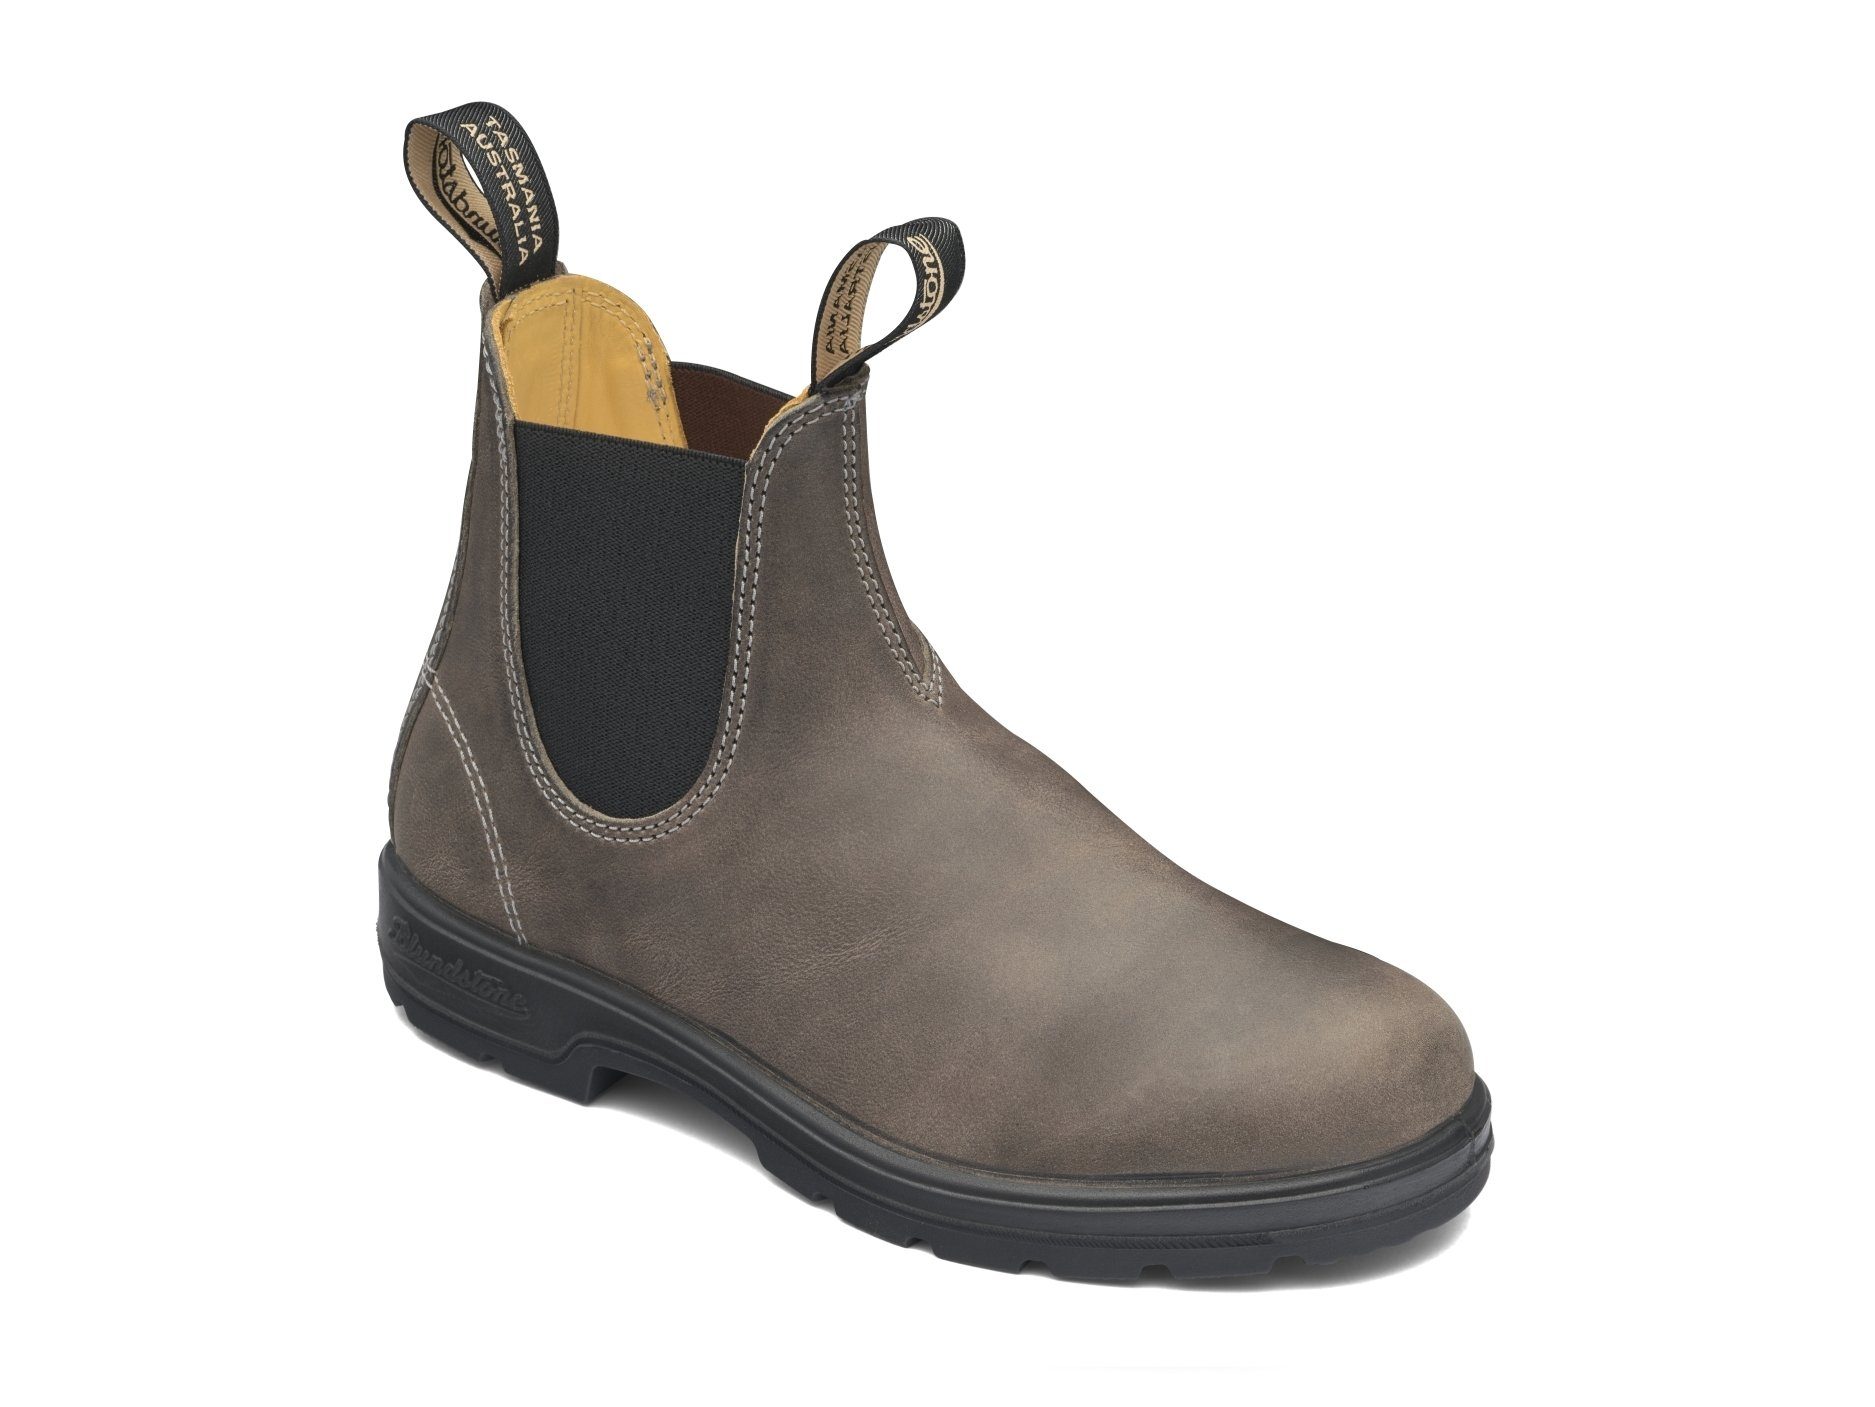 Blundstone Chelseaboots